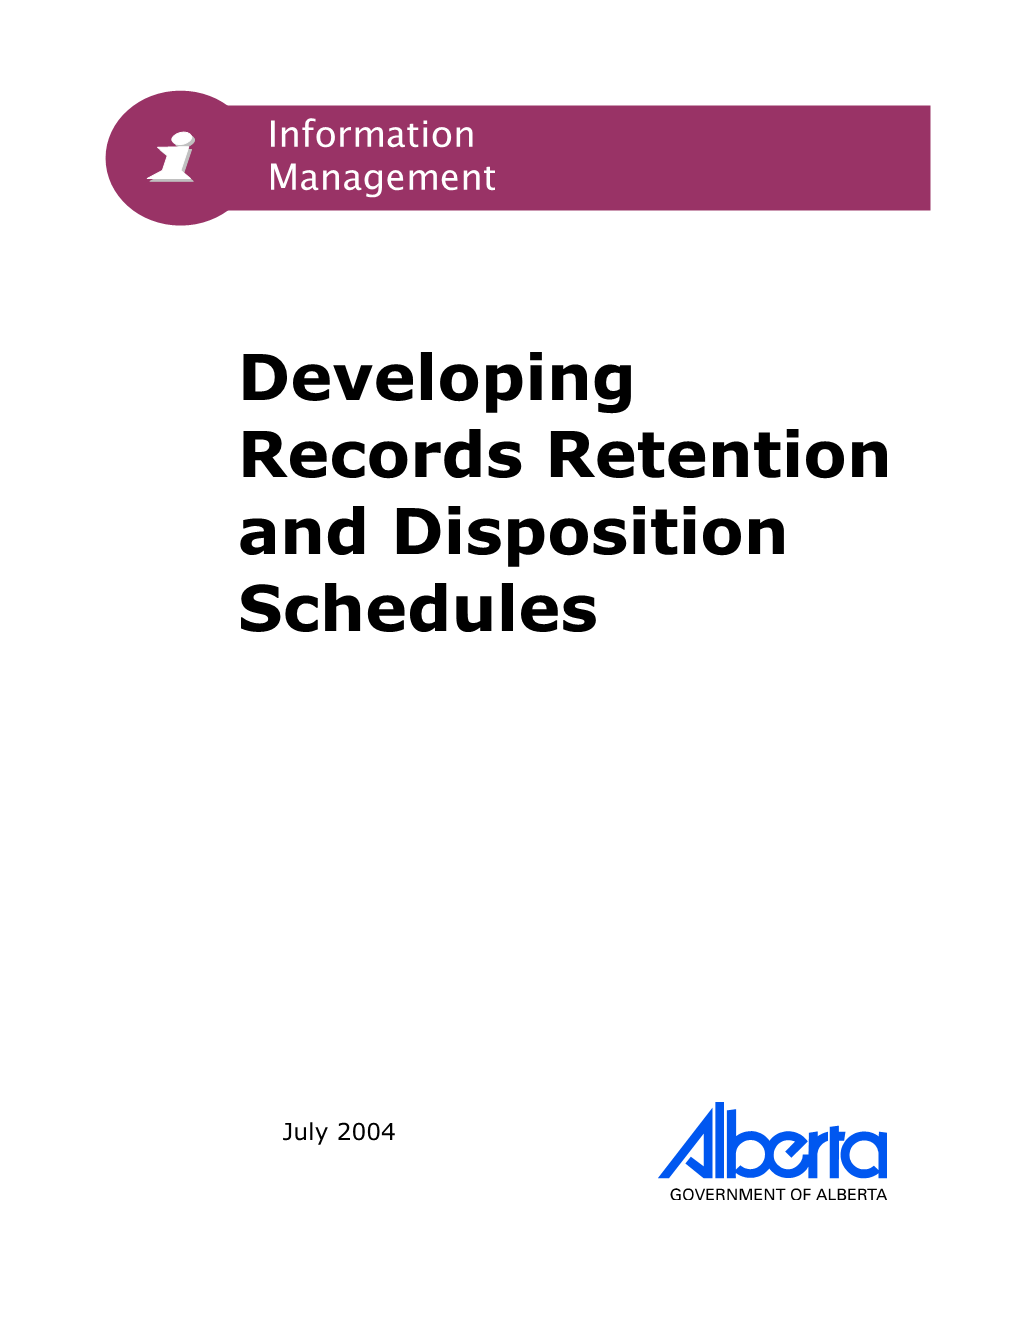 Developing Records Retention and Disposition Schedules